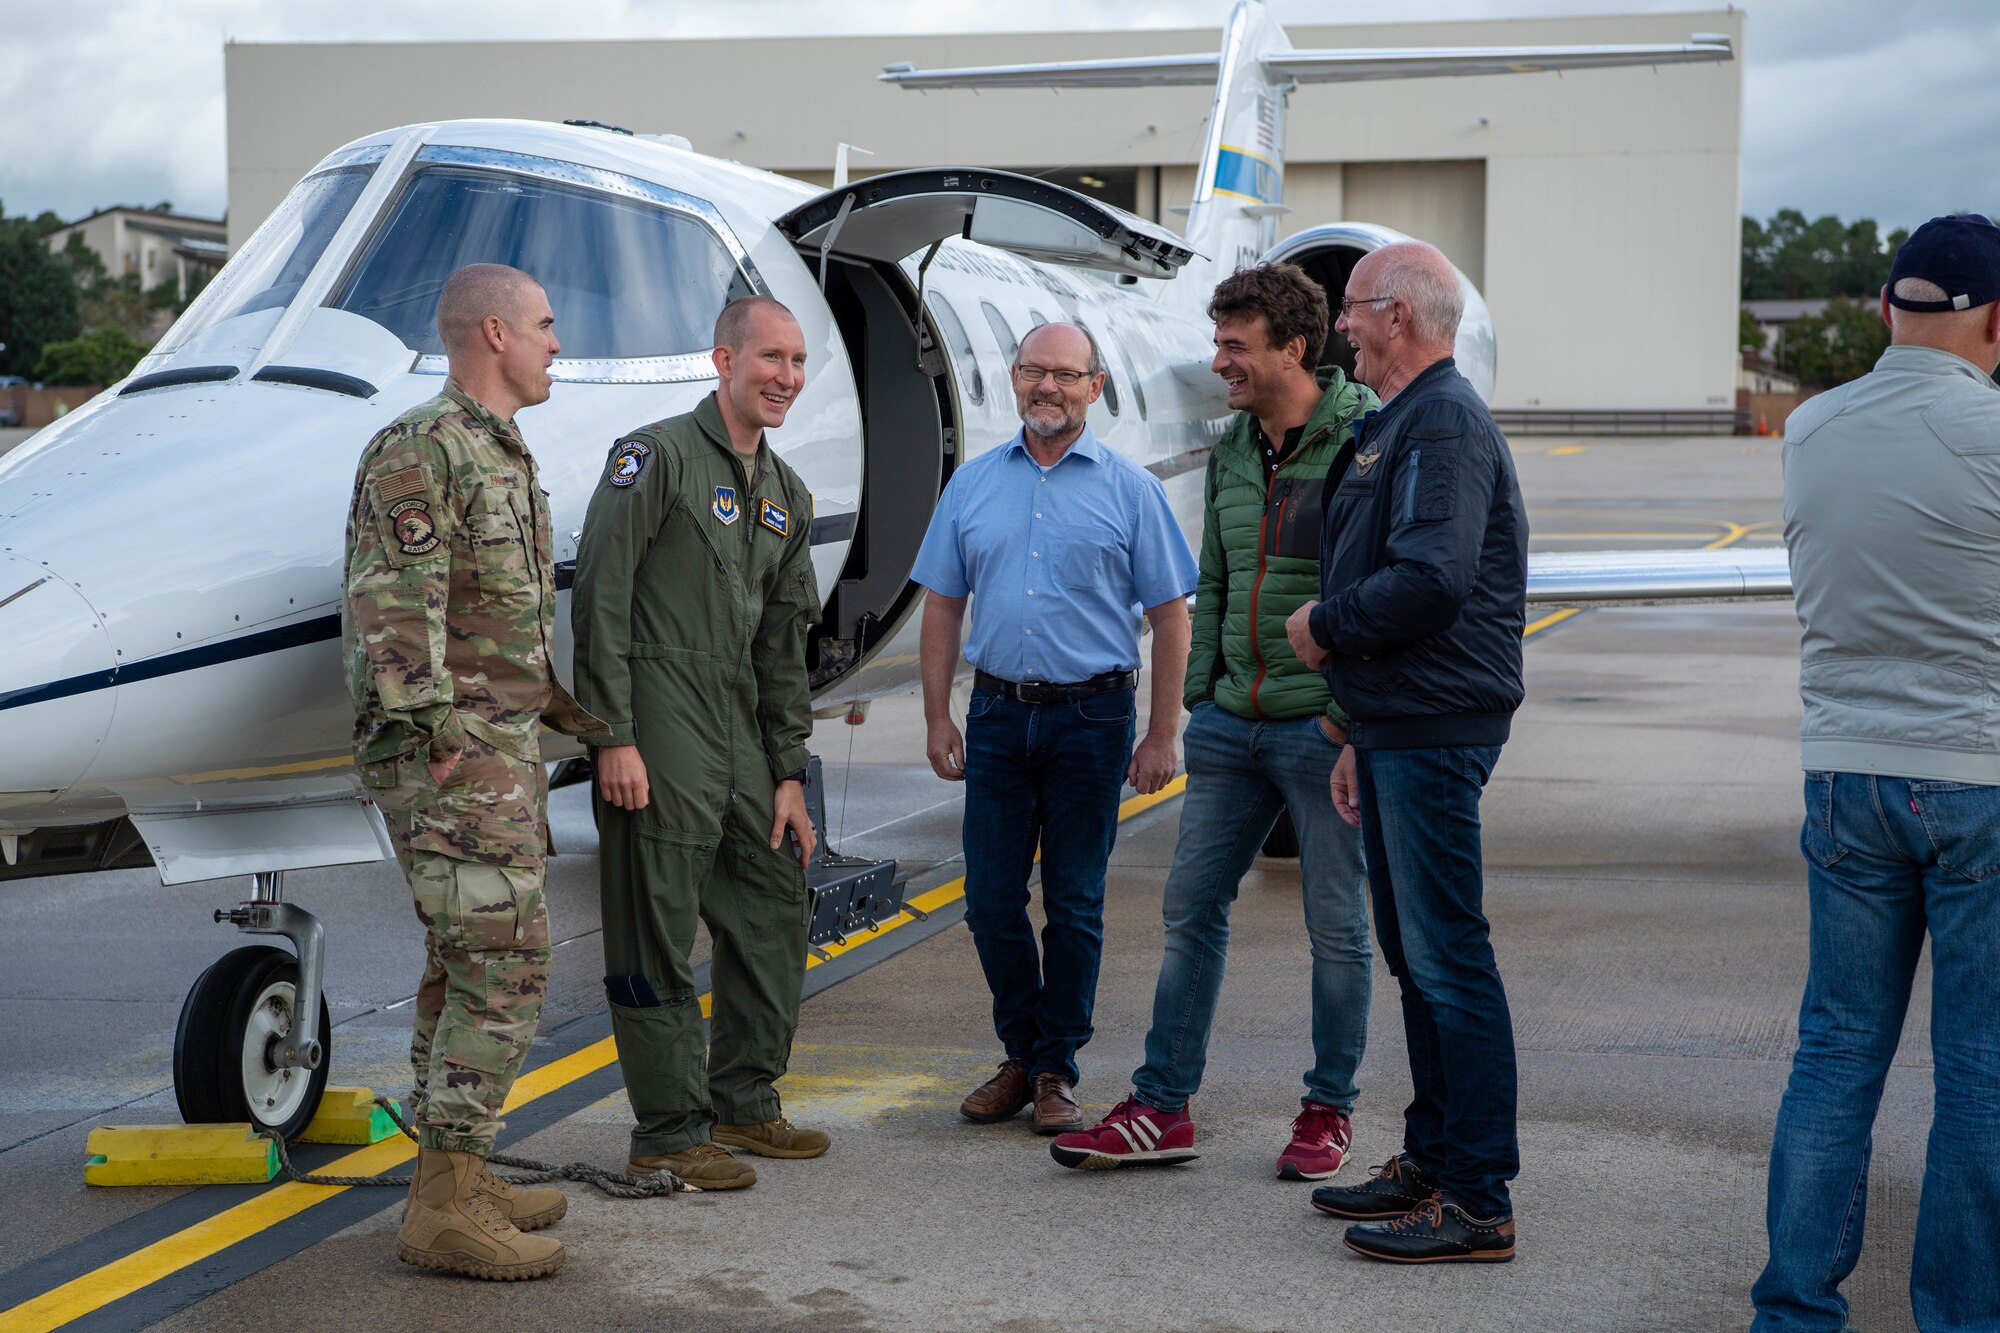 A group of glider pilots from various flying clubs in Rheinland-Pfalz gather to tour a C-21 Learjet 35 aircraft at Ramstein Air Base, Sept. 9, 2022 during a Mid-Air Collision Avoidance Meeting.